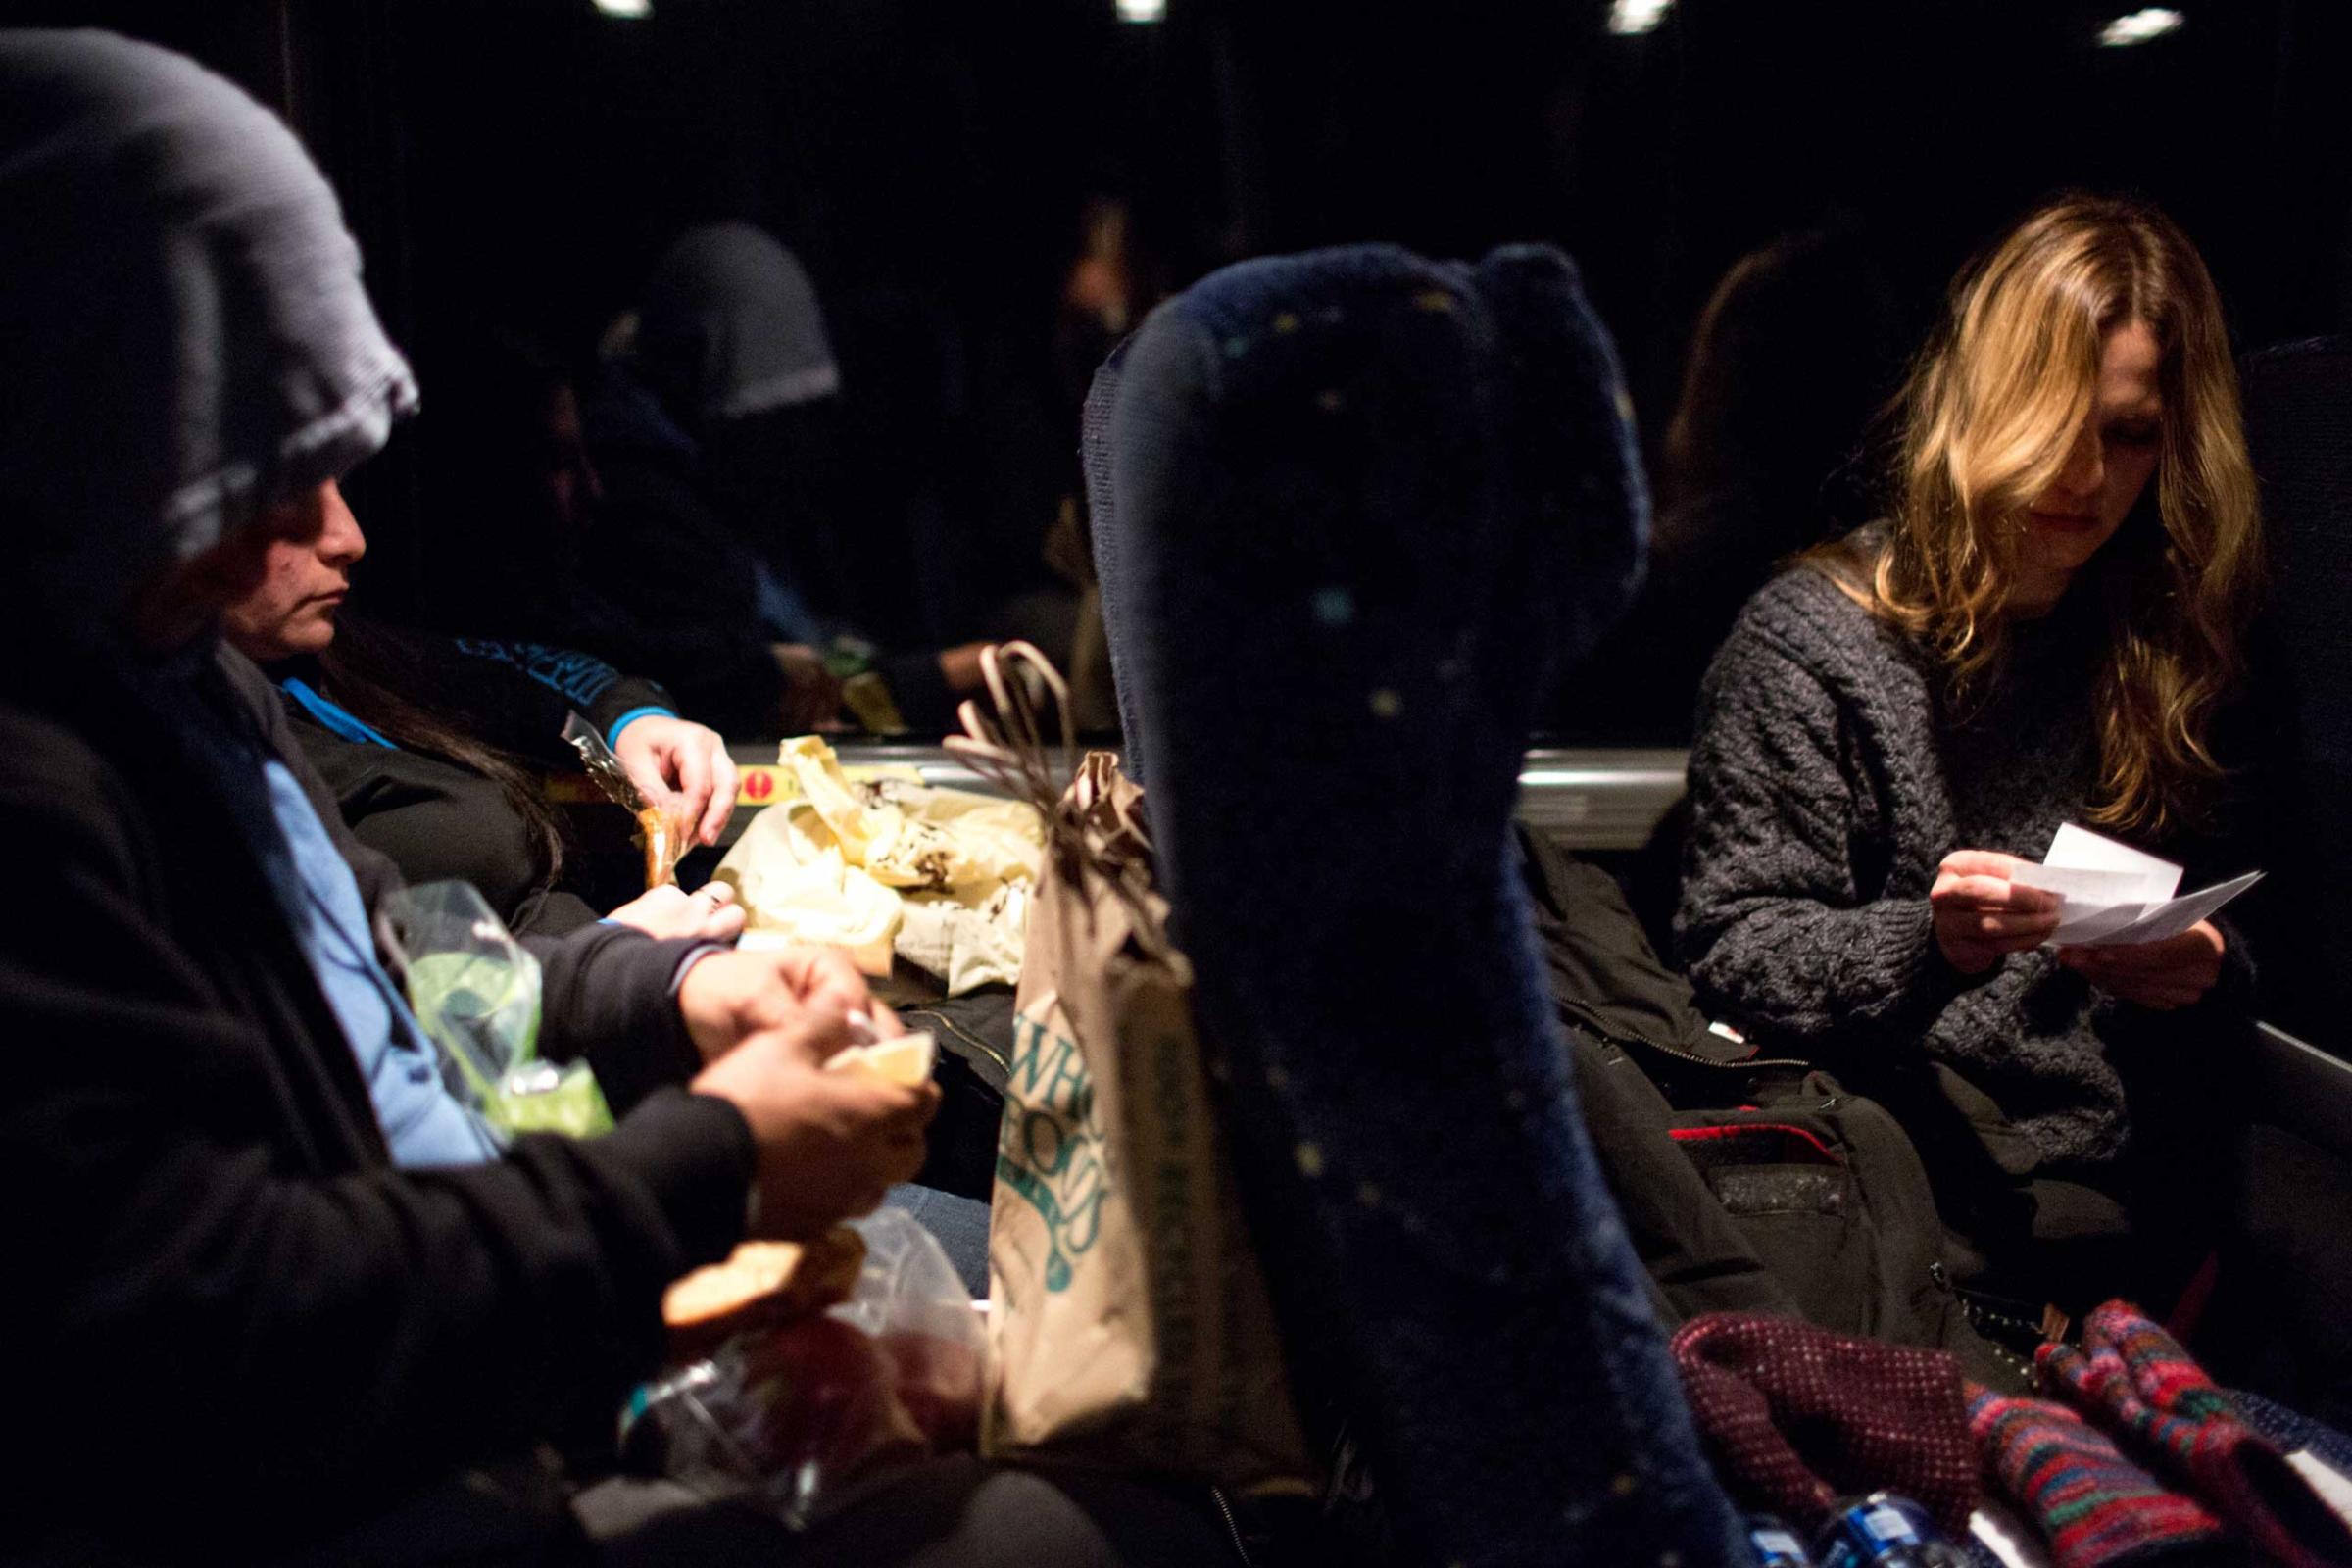 5:28 AM: Anna plans her protest sign while other activists prepare their lunches around 5am as the bus approaches D.C.